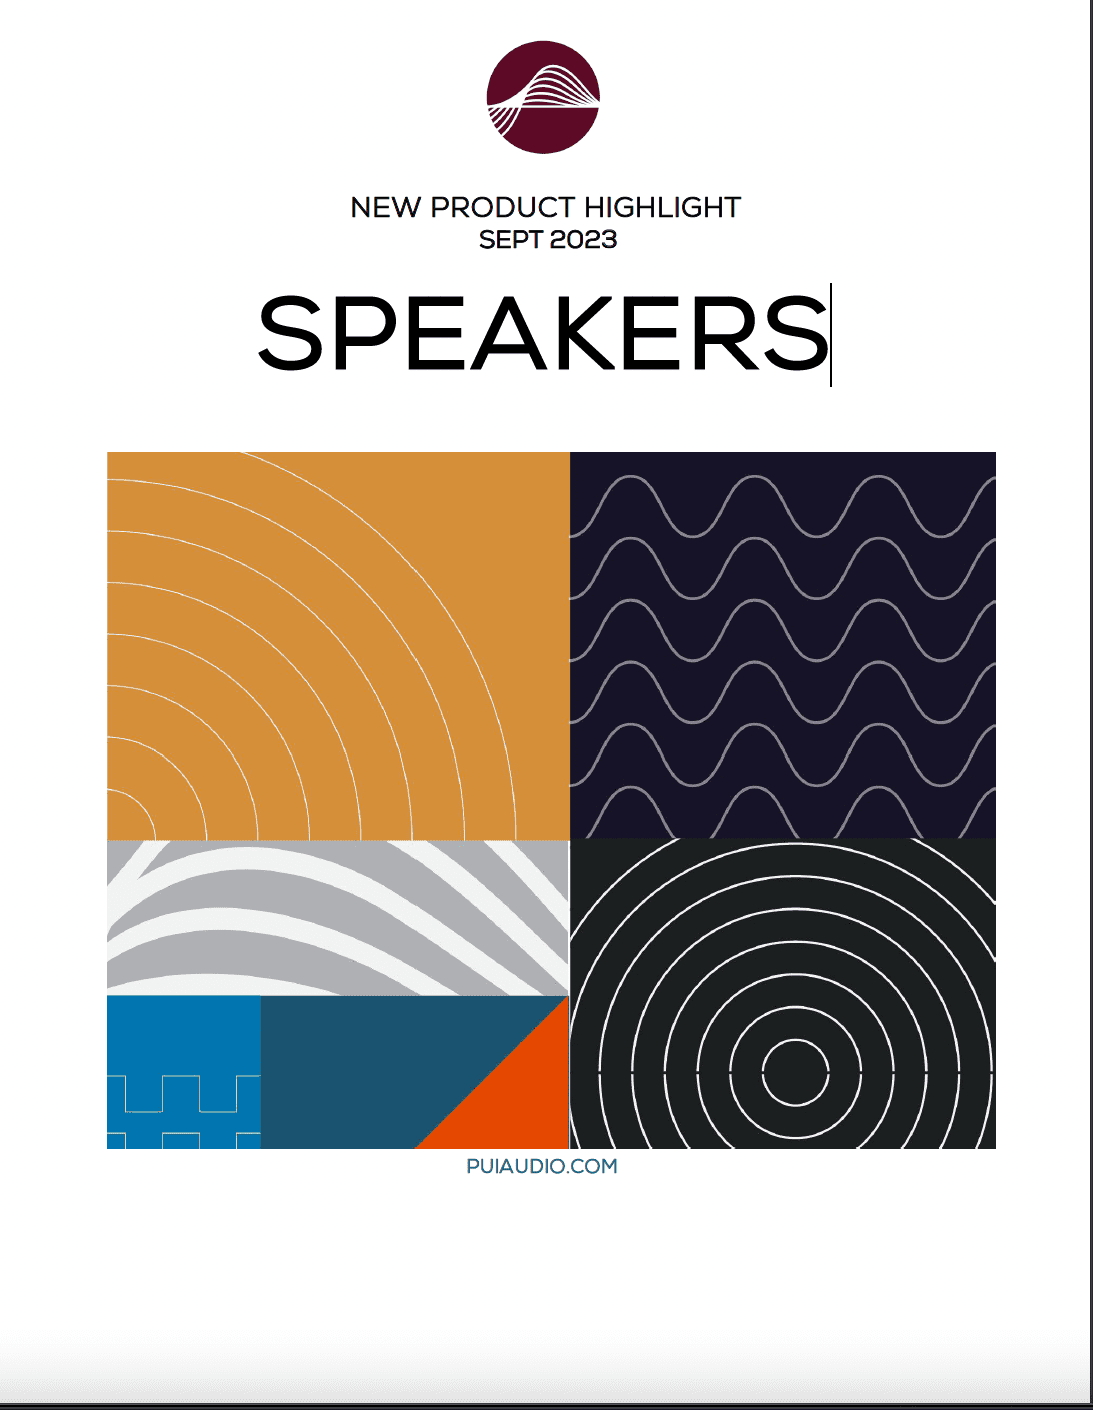 NEW PRODUCT HIGHLIGHT SEPT 2023 SPEAKERS